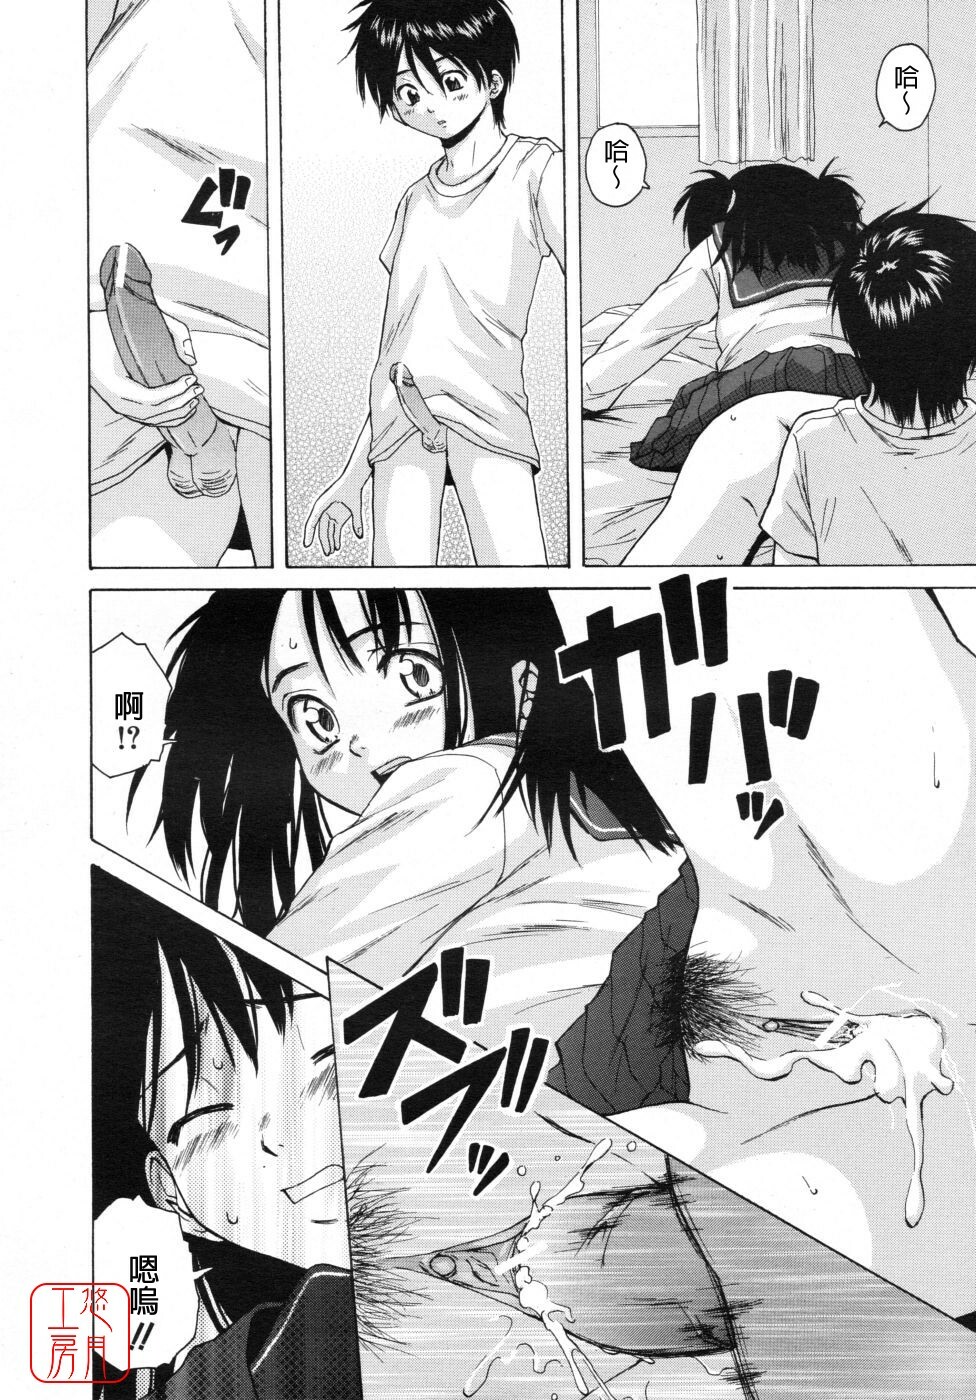 [Fuuga] Girl Friend 2 (Chinese) page 30 full